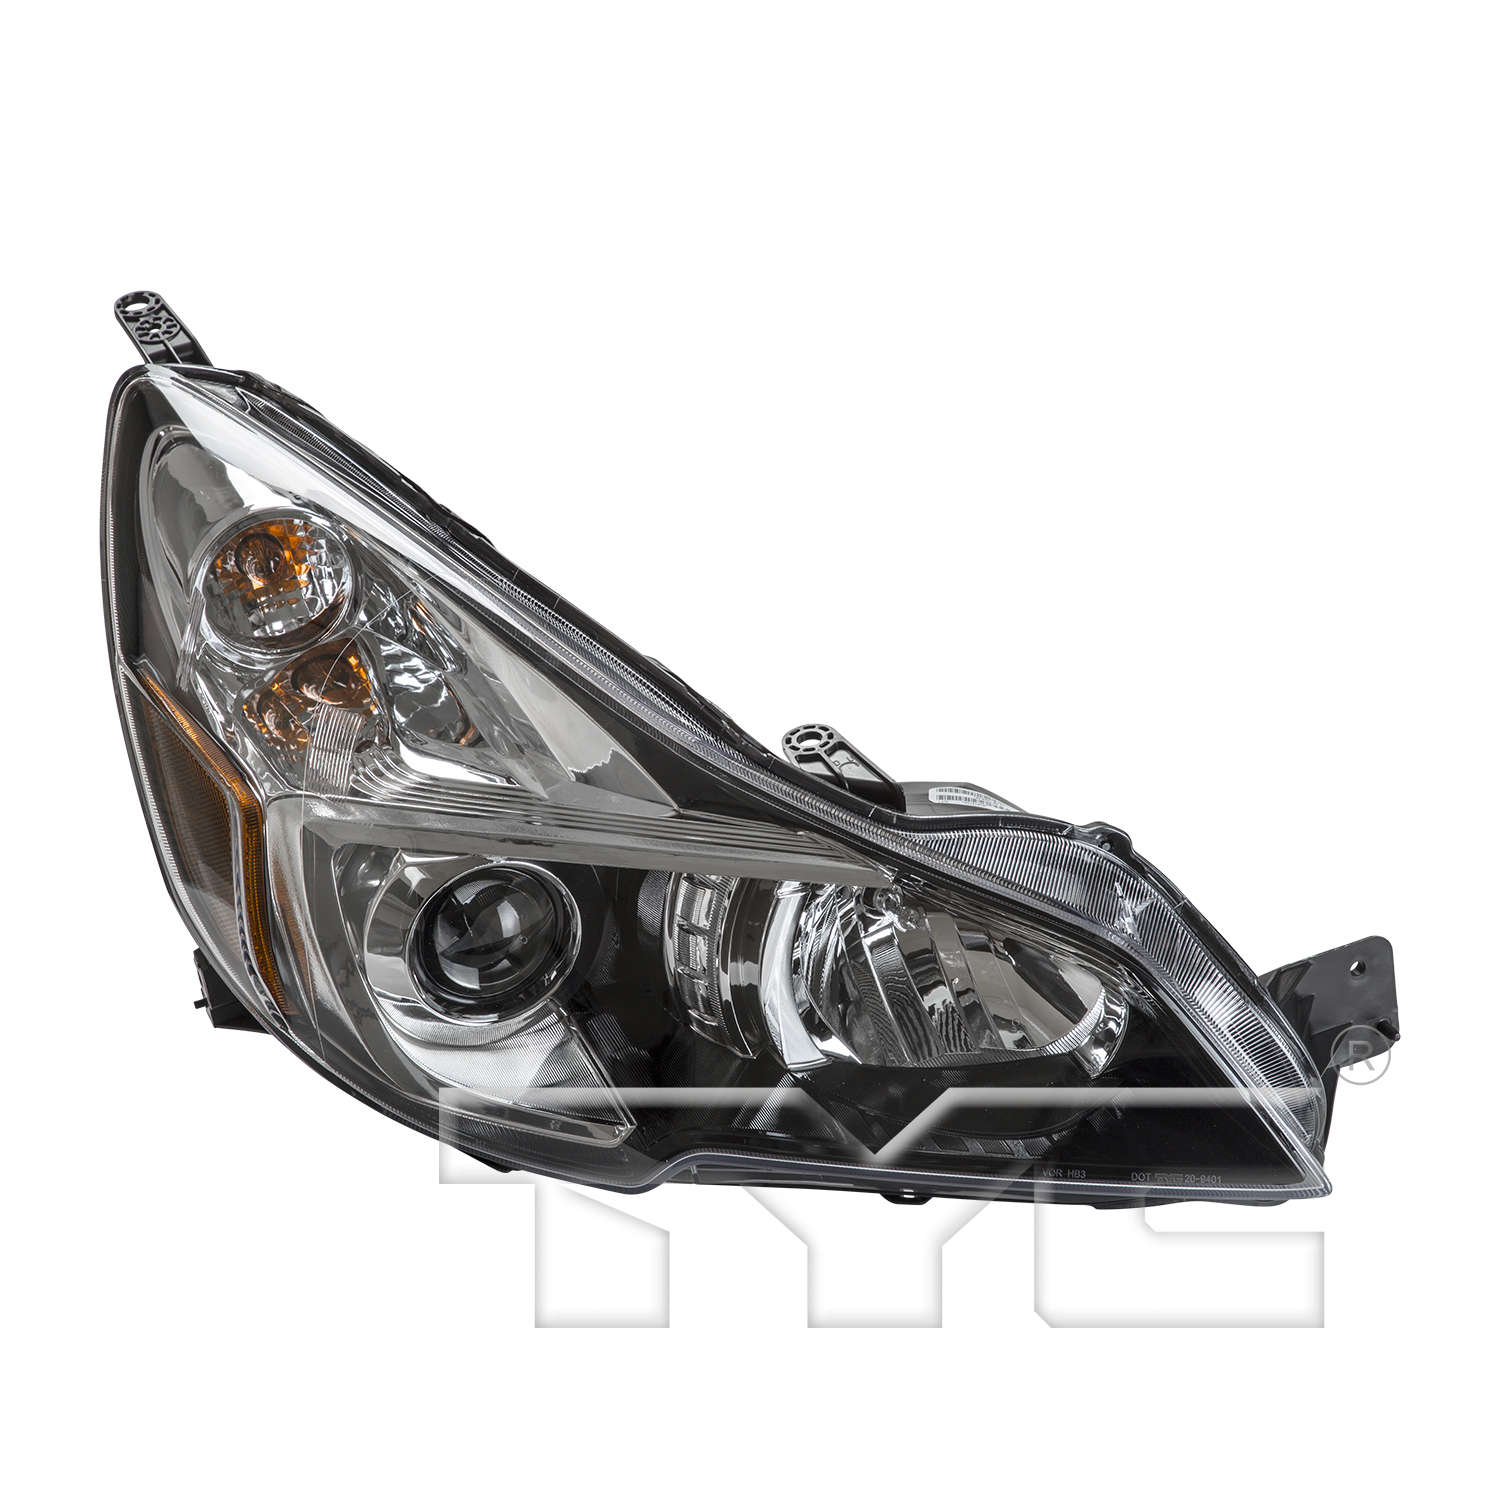 Aftermarket HEADLIGHTS for SUBARU - LEGACY, LEGACY,13-14,RT Headlamp assy composite